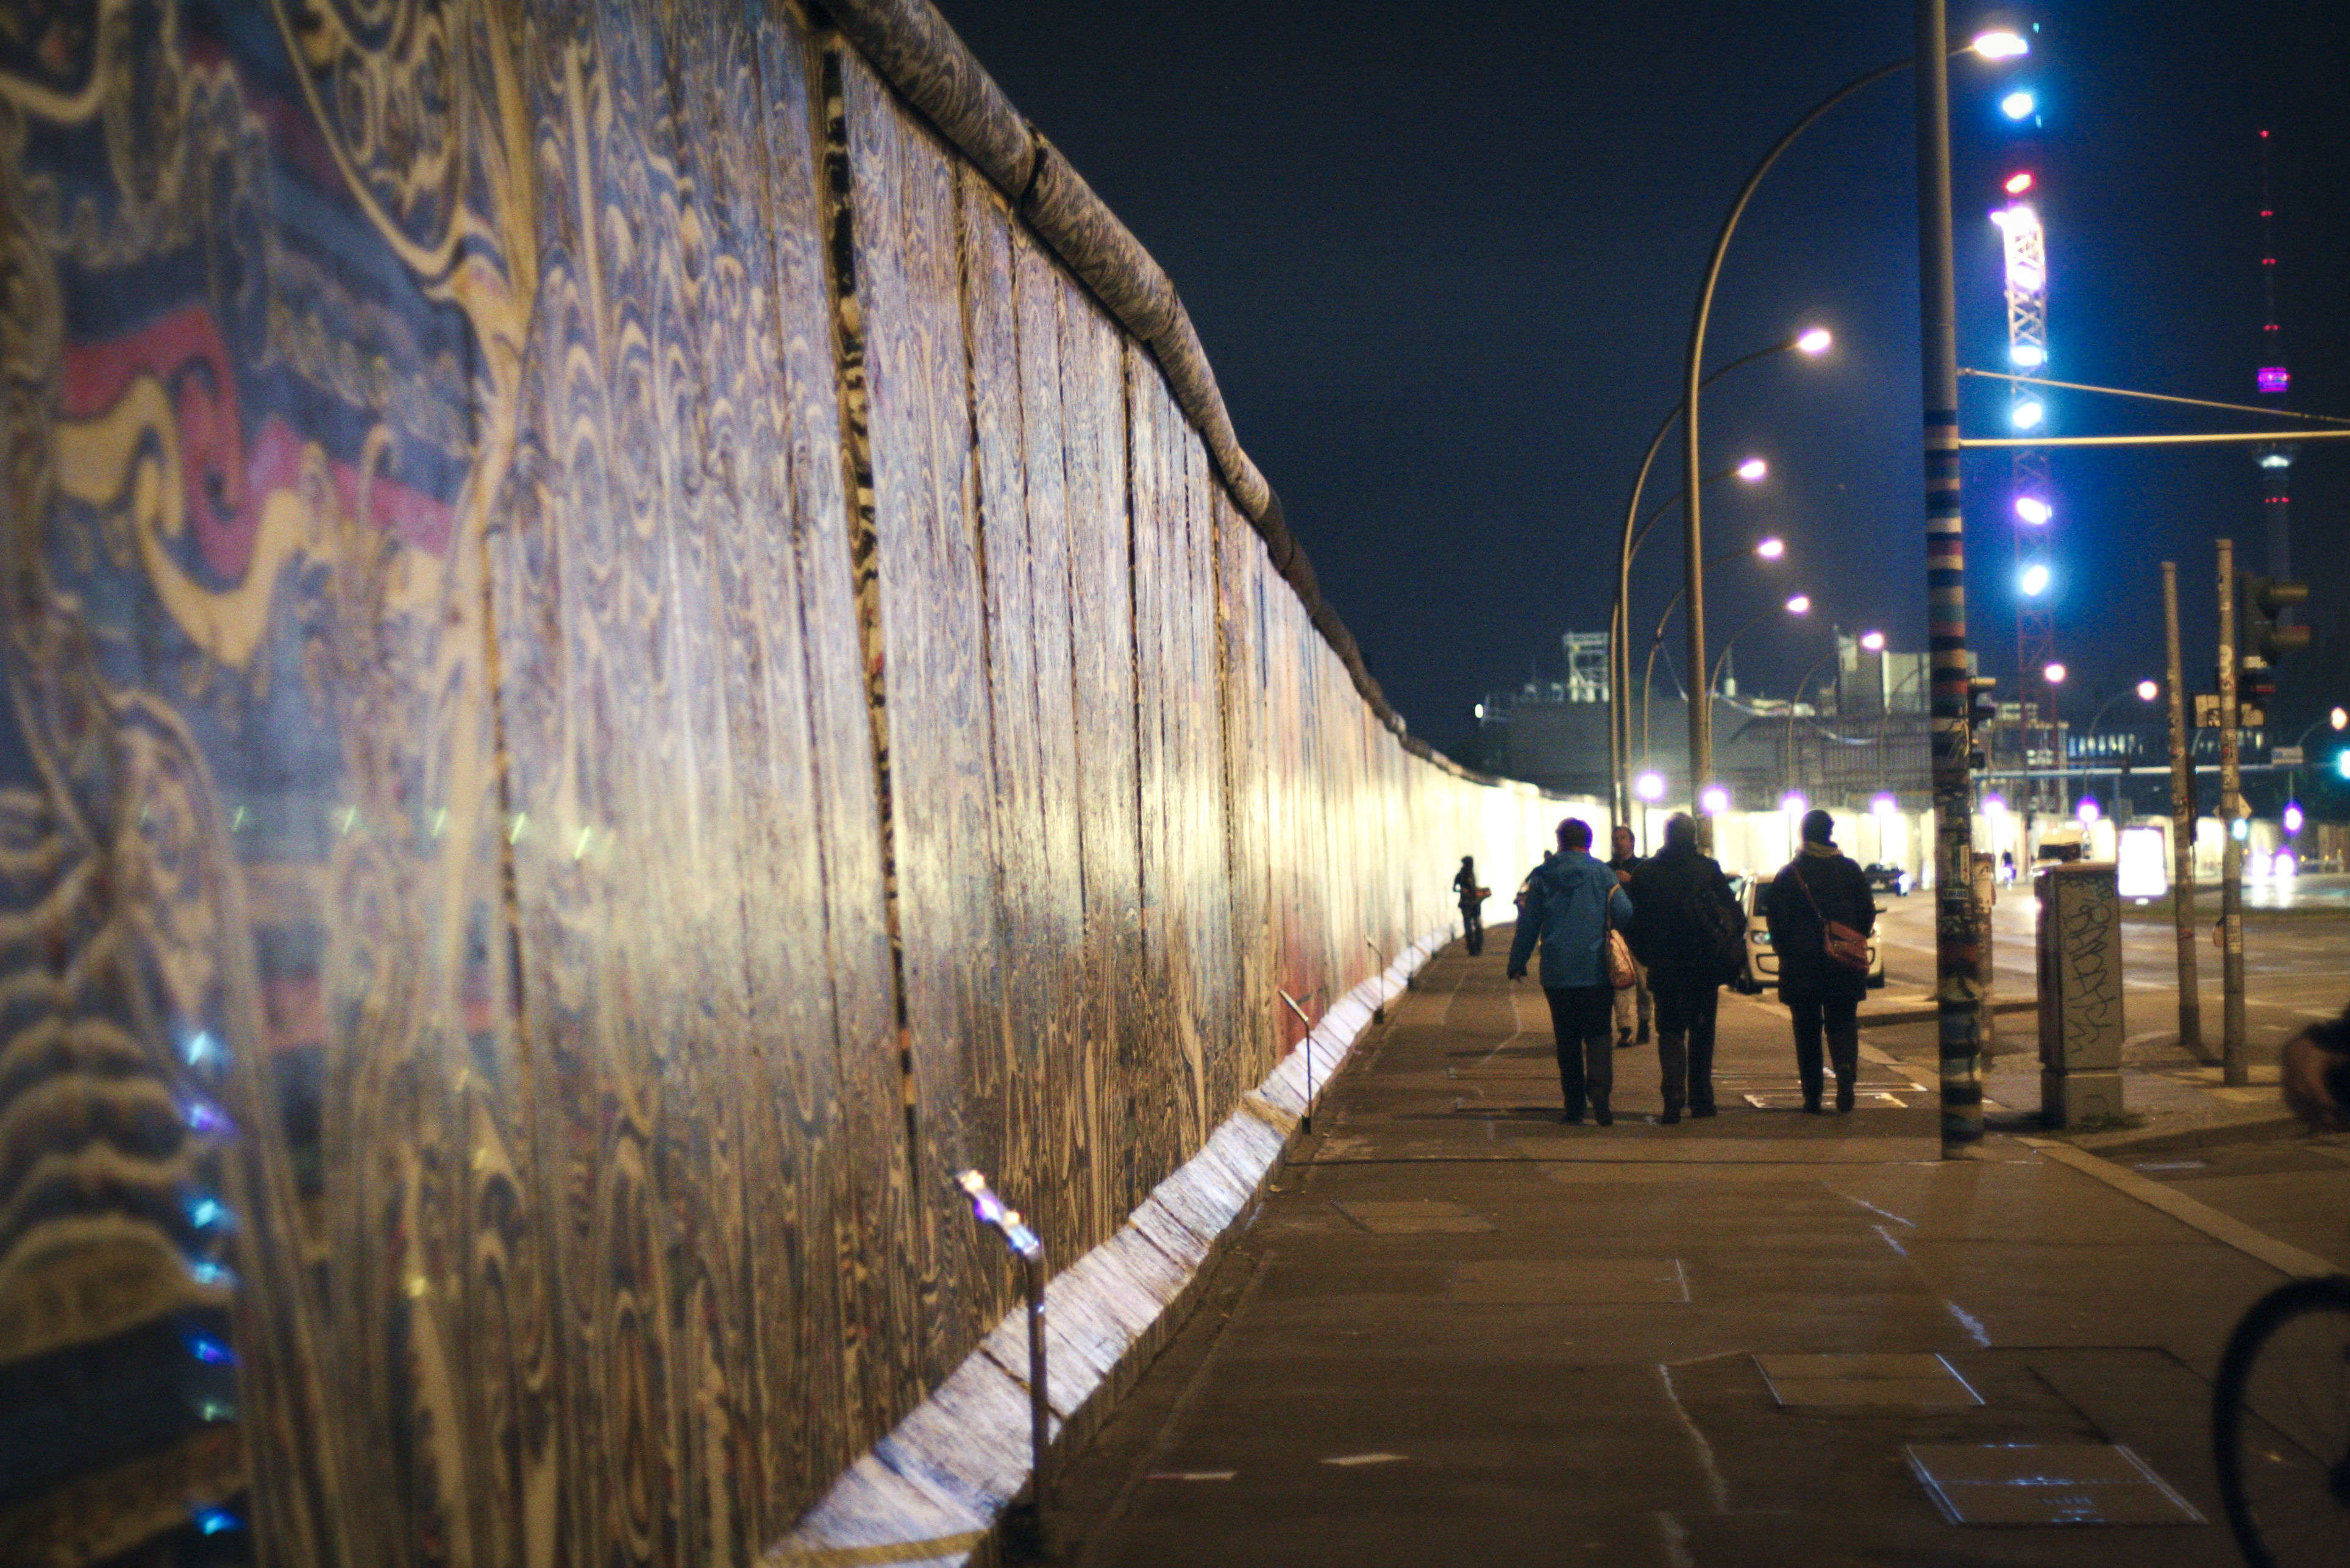 Fall of the Berlin Wall, an incredible 30th-anniversary festival lined up